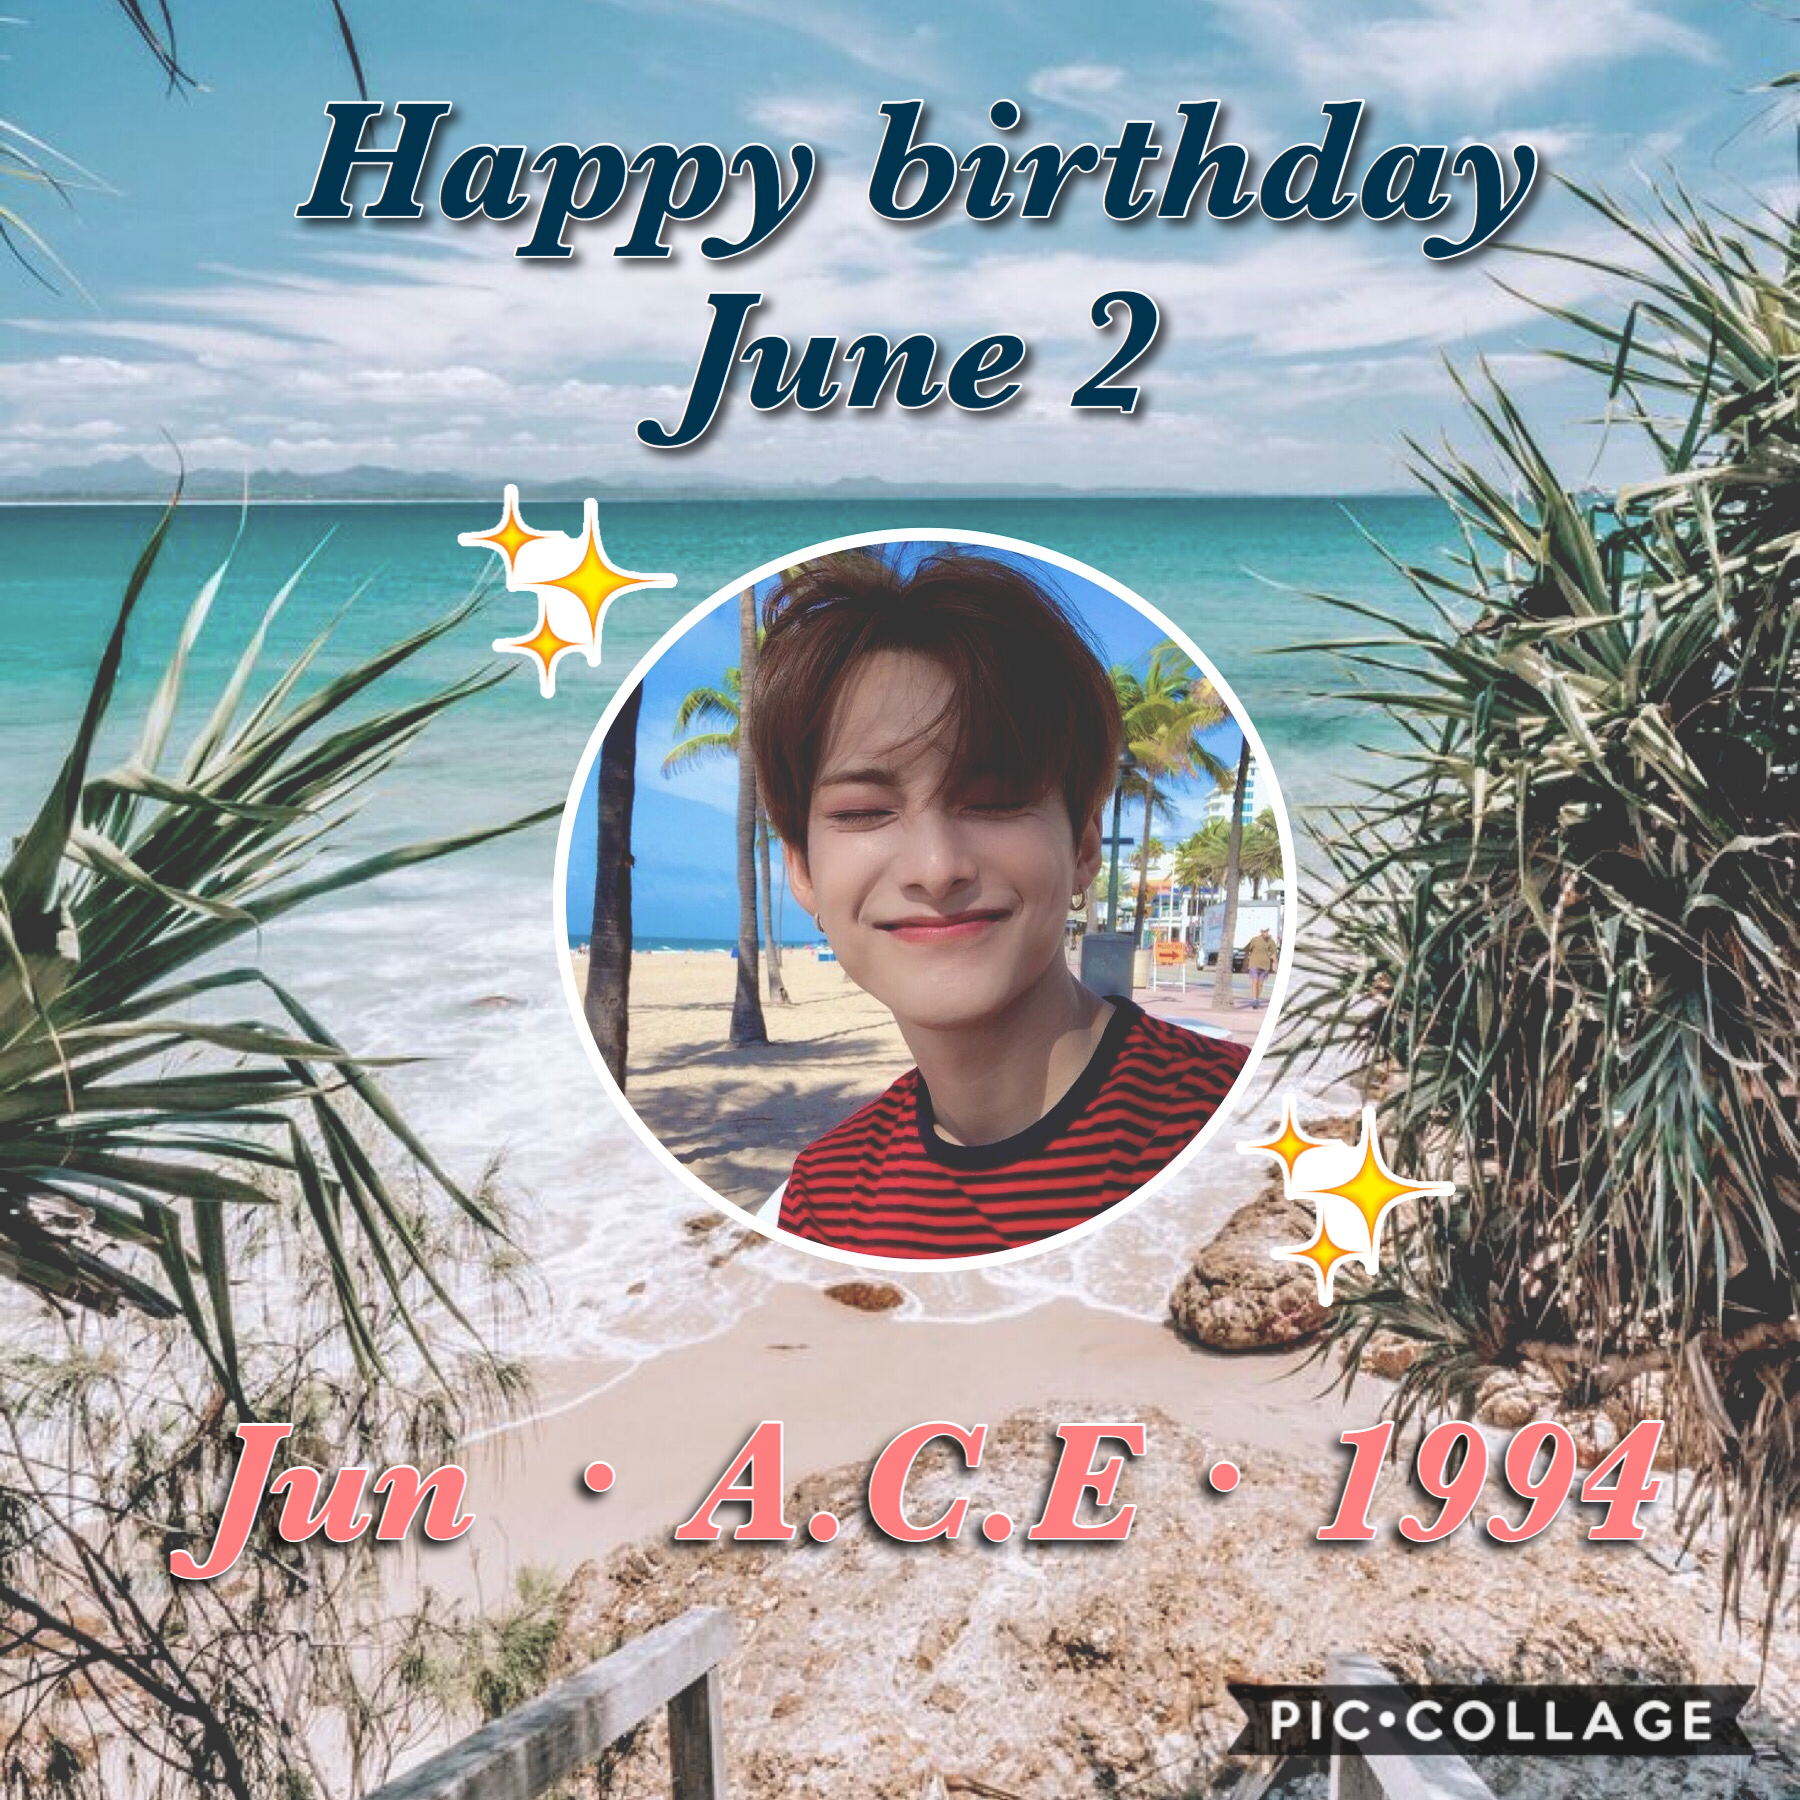 •🌷🌹•
Happy birthday! It’s kinda cool how his name is Jun and his bday is in June... there’s another Jun bday coming up as well haha!
Other birthdays:
•GFRIEND’s SinB~ June 3
•MOMOLAND’s Taeha~ June 3
🌹🌷~Whoop~🌷🌹